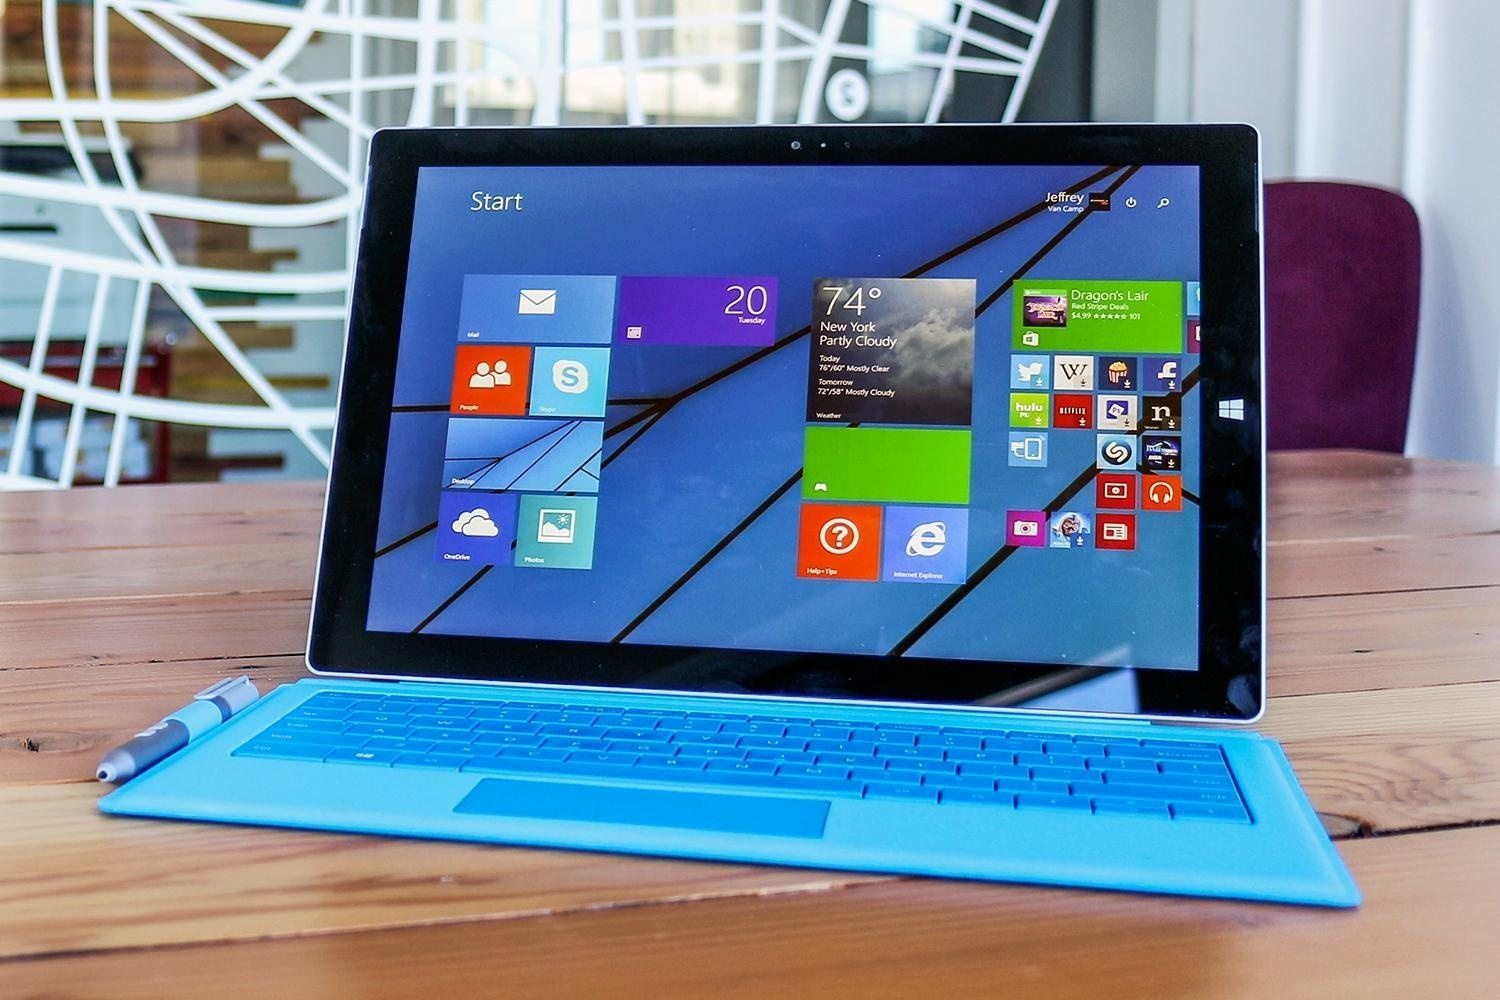 microsoft-surface-pro-3-hands-on-1500x1000-1500x1000